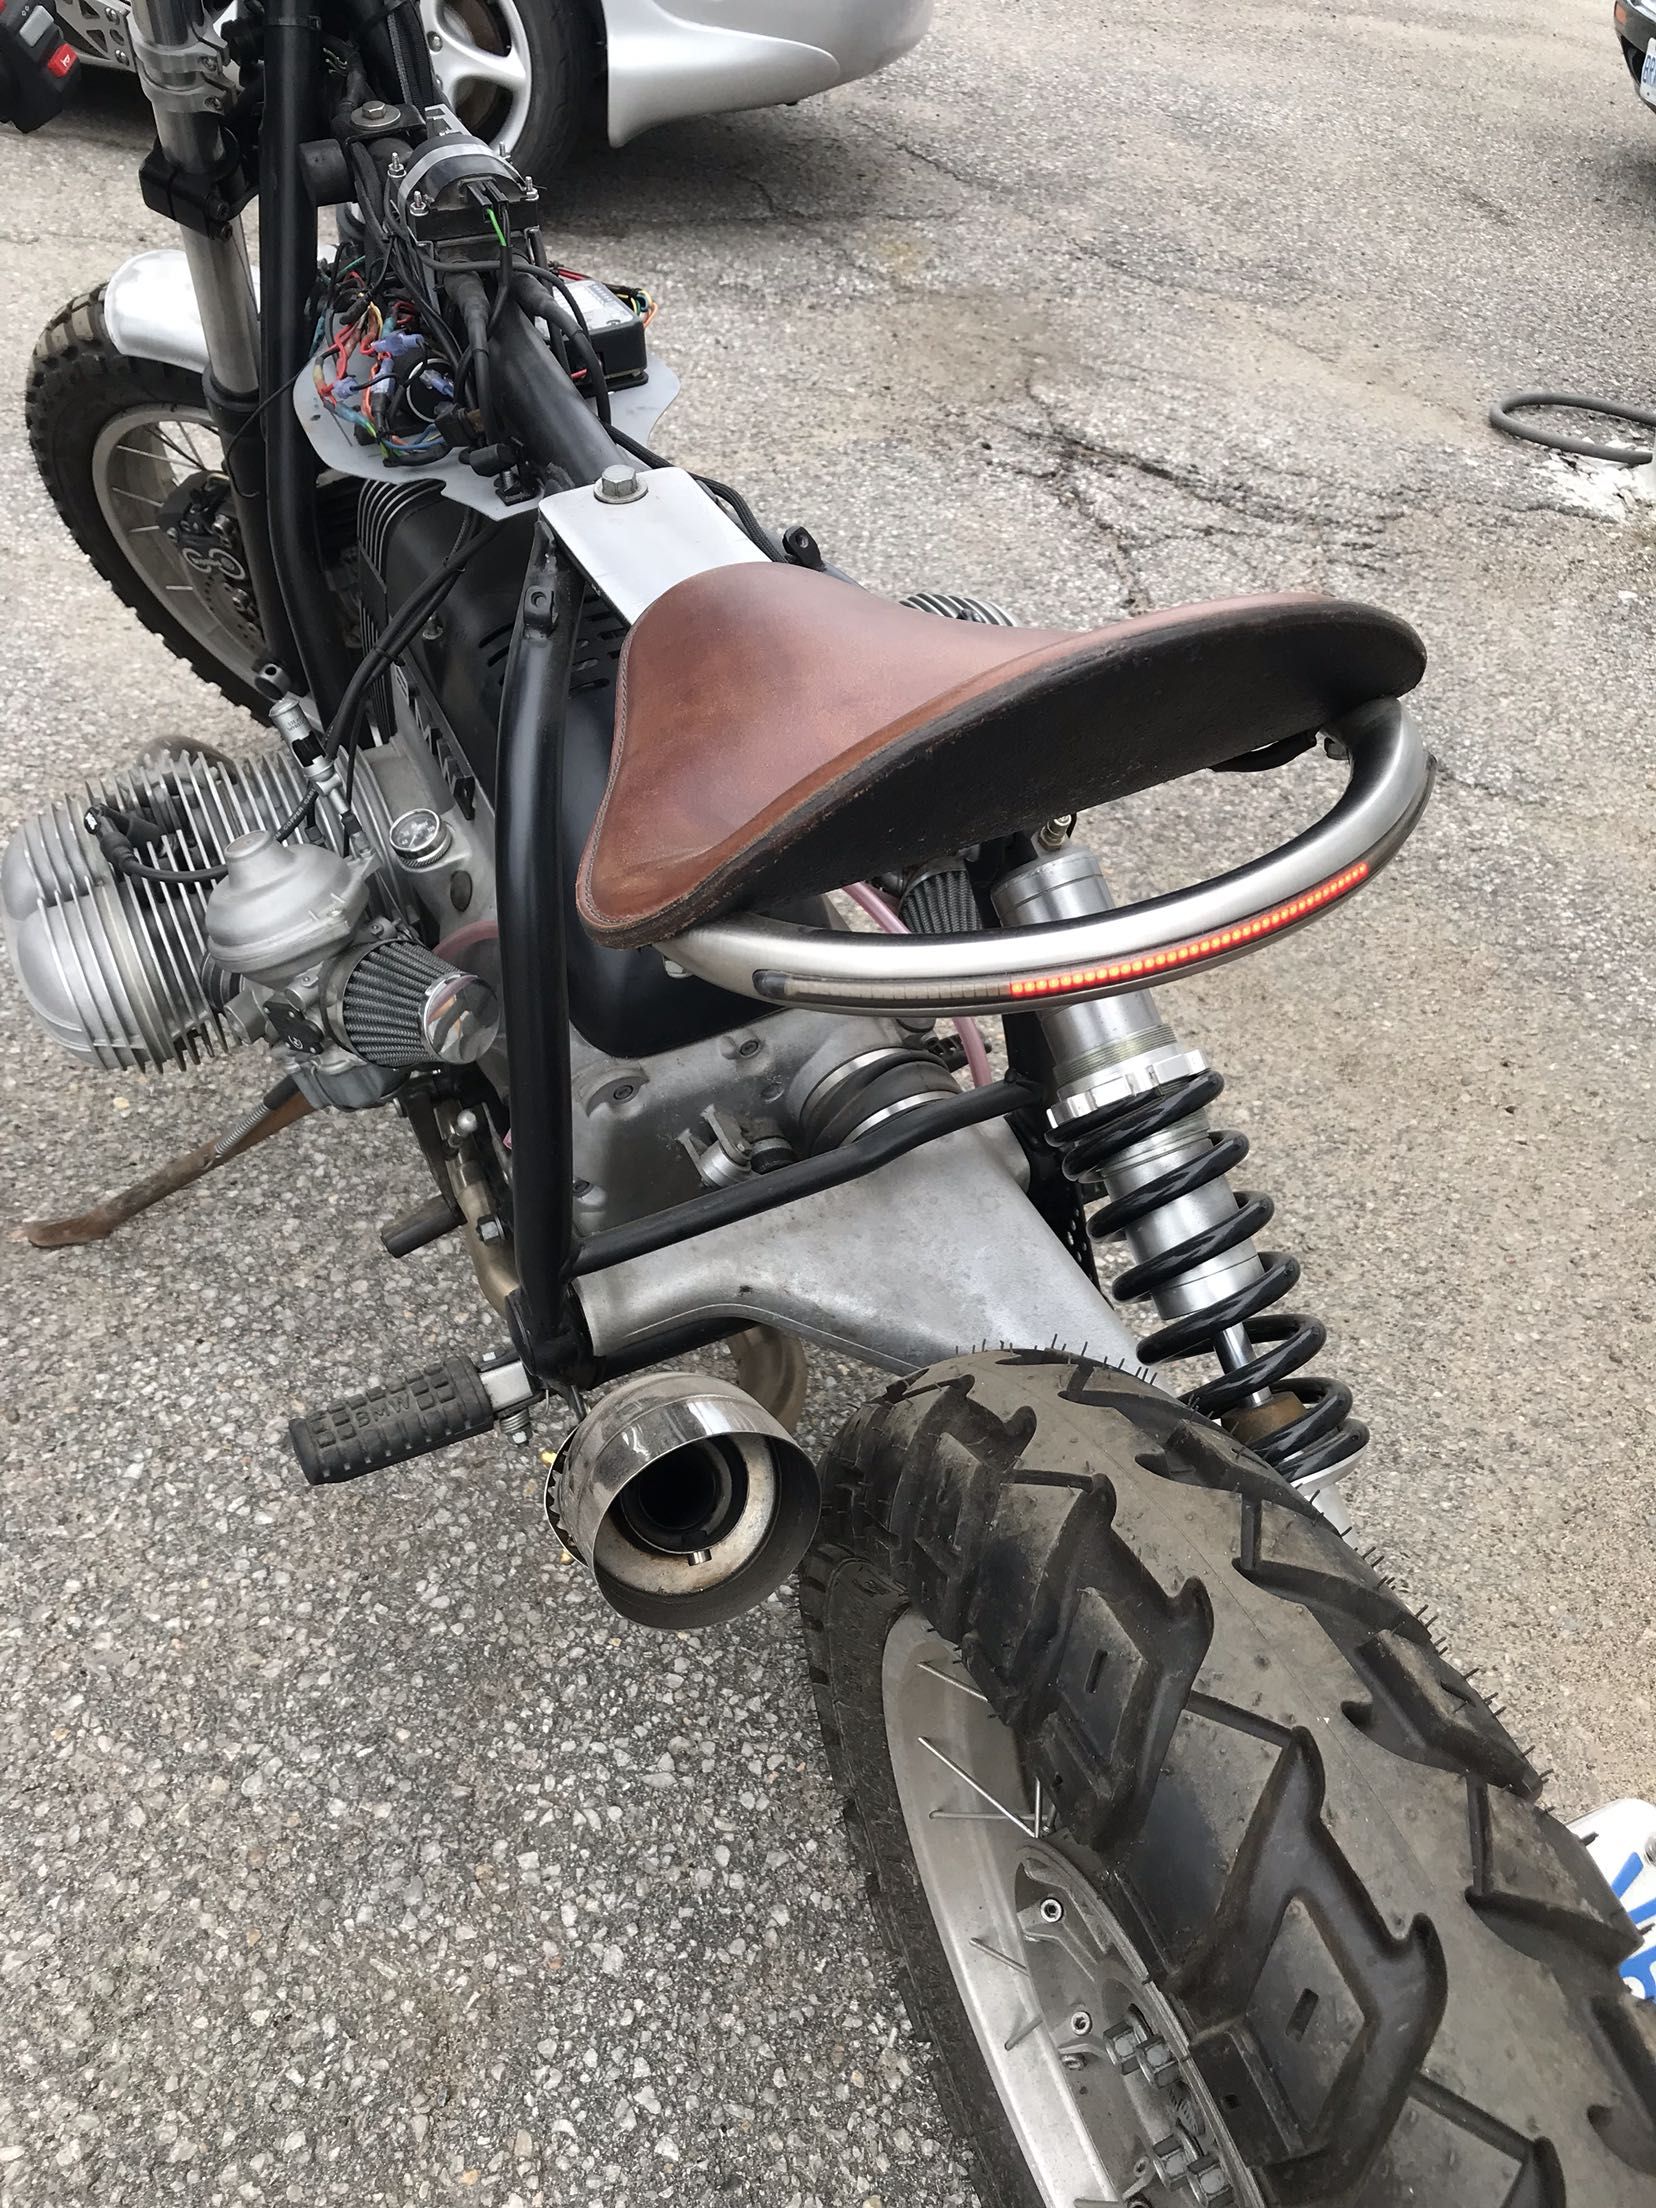 R100R BMW Scrambler seat and rear LED signal and brakes